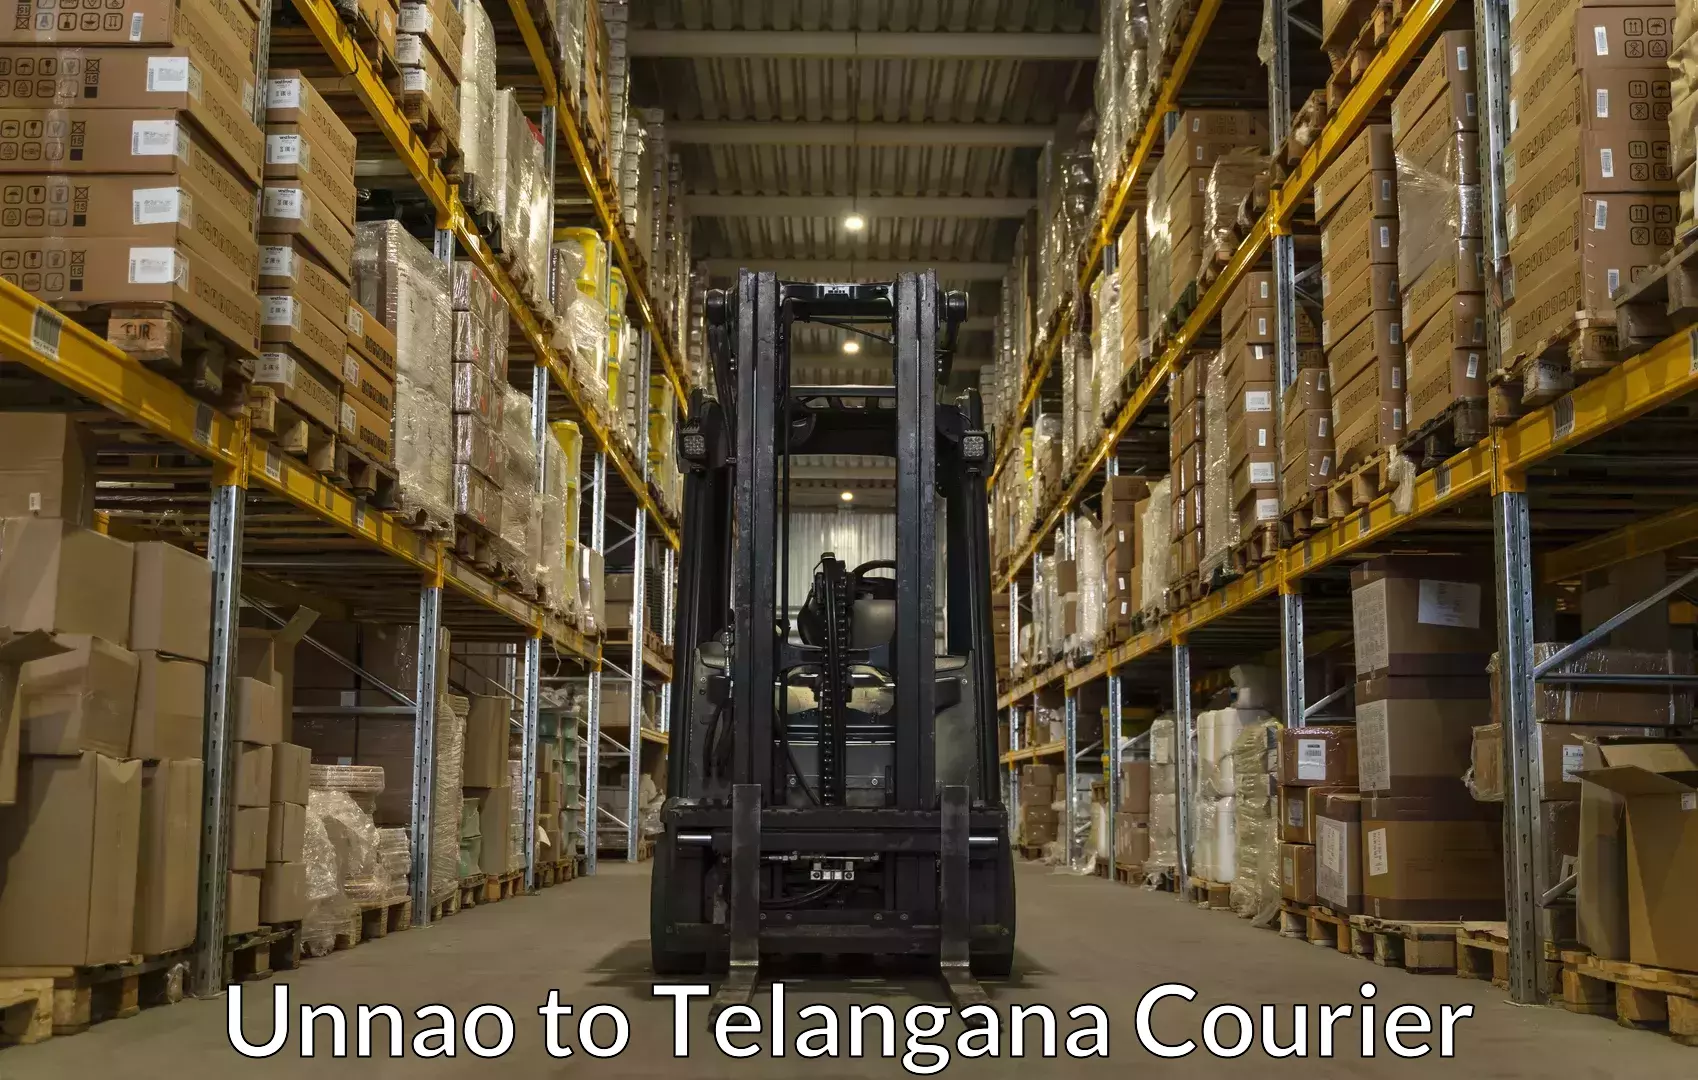 Baggage transport network Unnao to Secunderabad